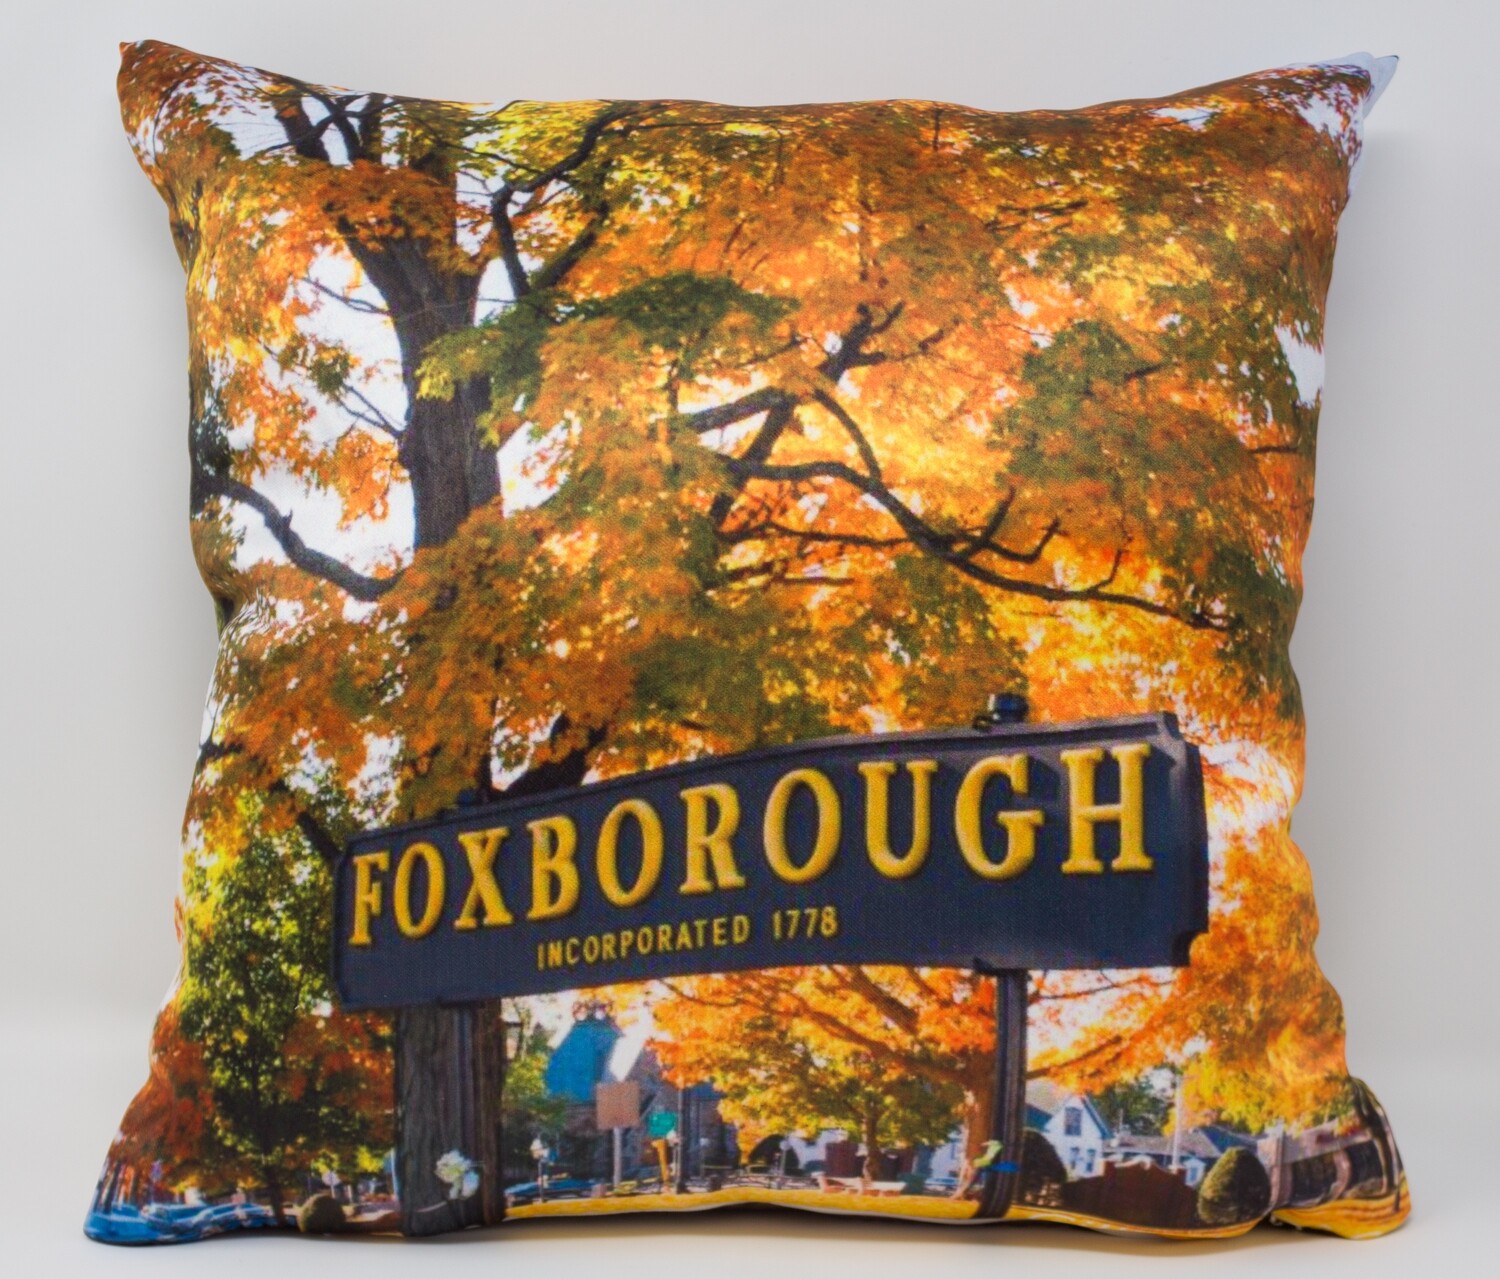 Foxboro Gallery-14"x 14" Double Sided Photo Pillow-Foxboro Iconic Sign and Common in Autumn